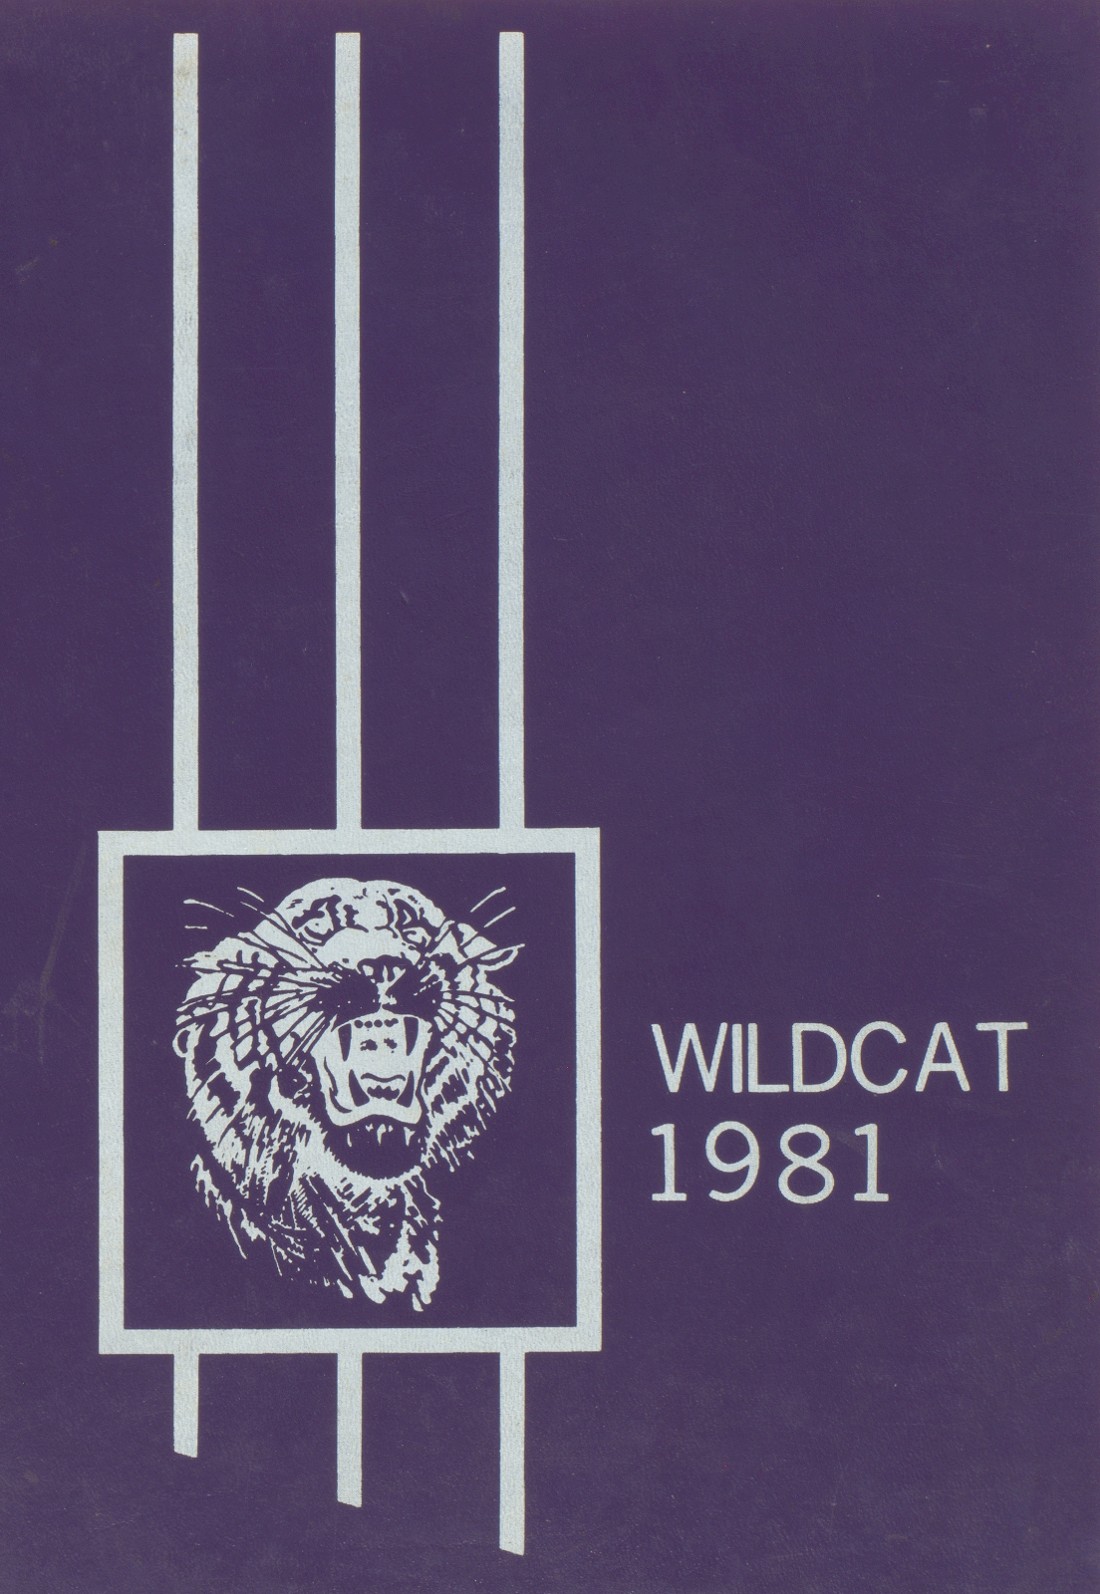 1981 yearbook from Coalgate High School from Coalgate, Oklahoma for sale